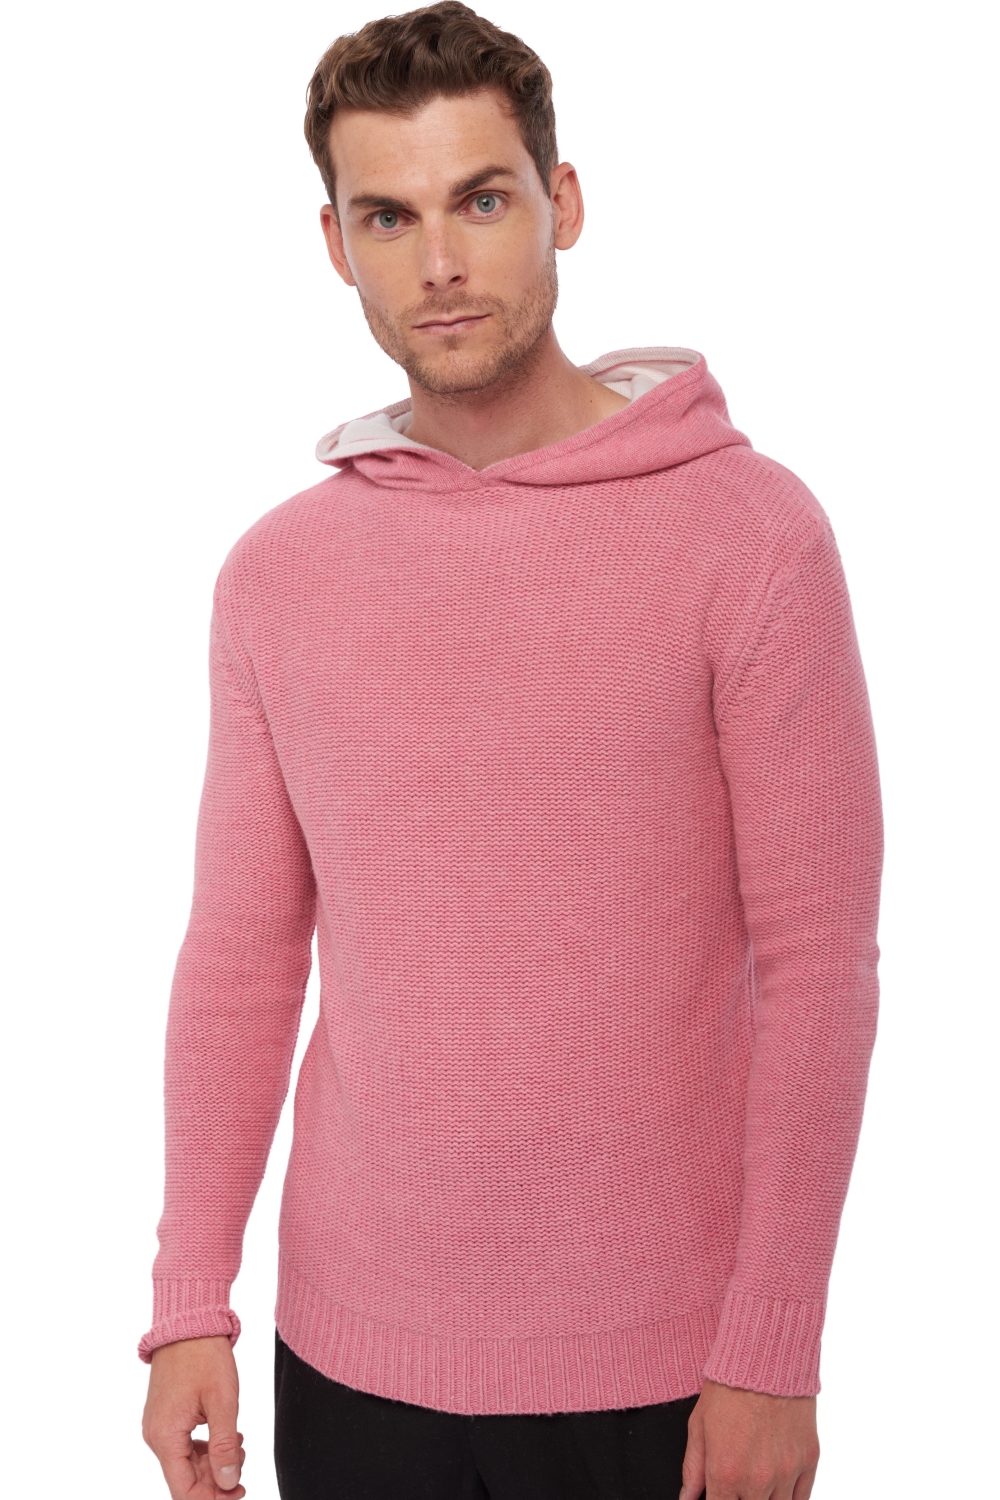 Yak pull homme conor pink blanc casse xl